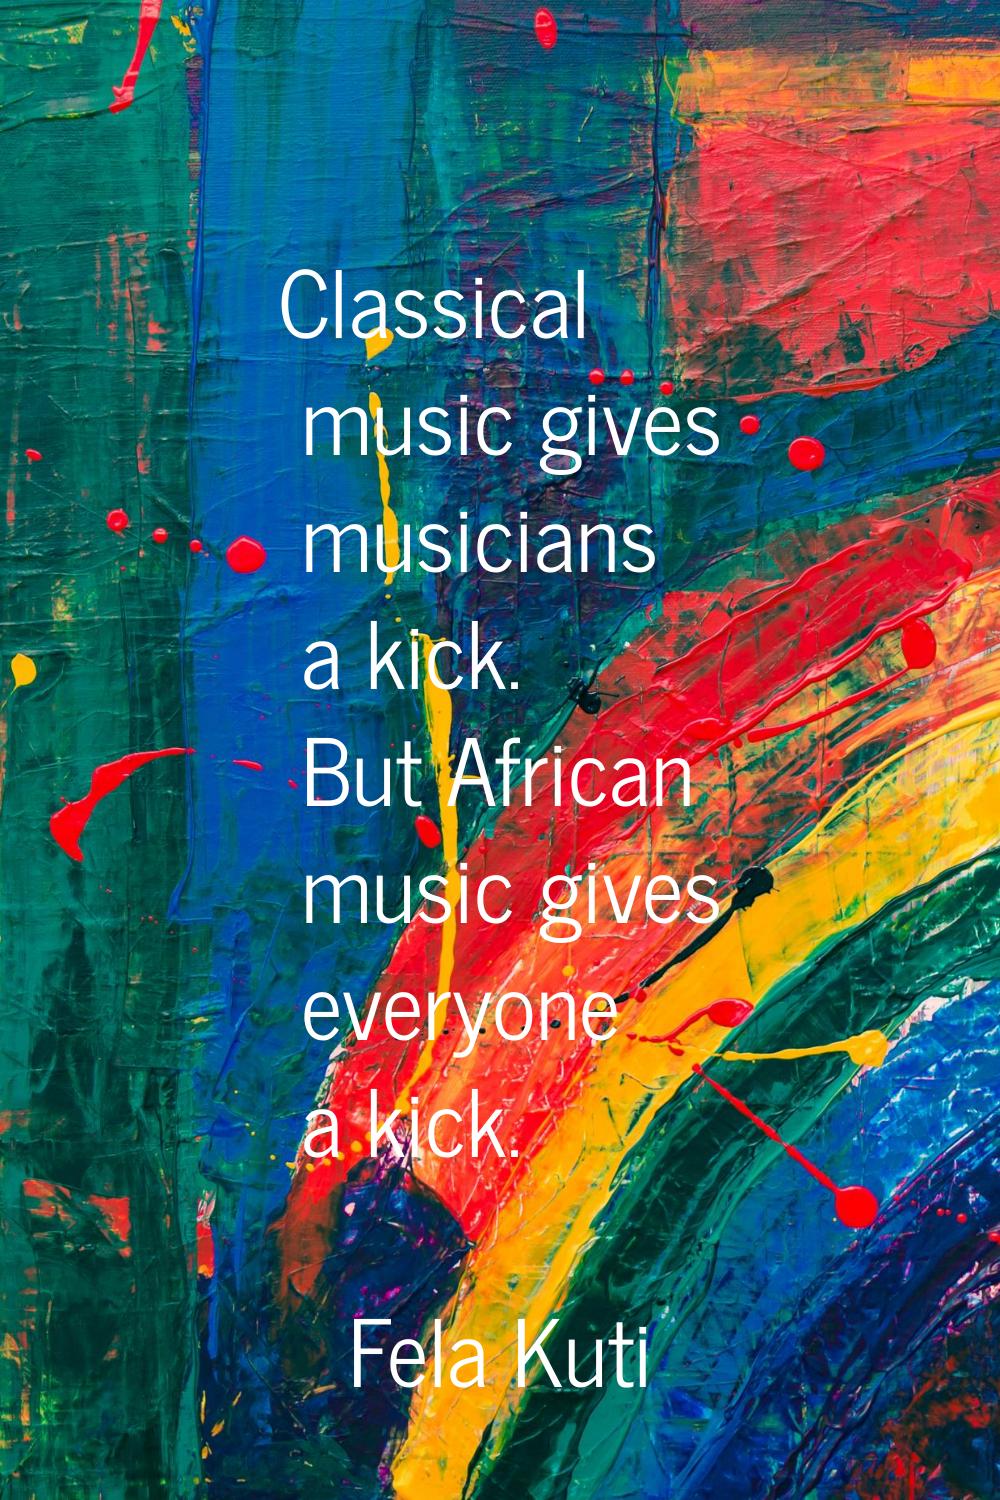 Classical music gives musicians a kick. But African music gives everyone a kick.